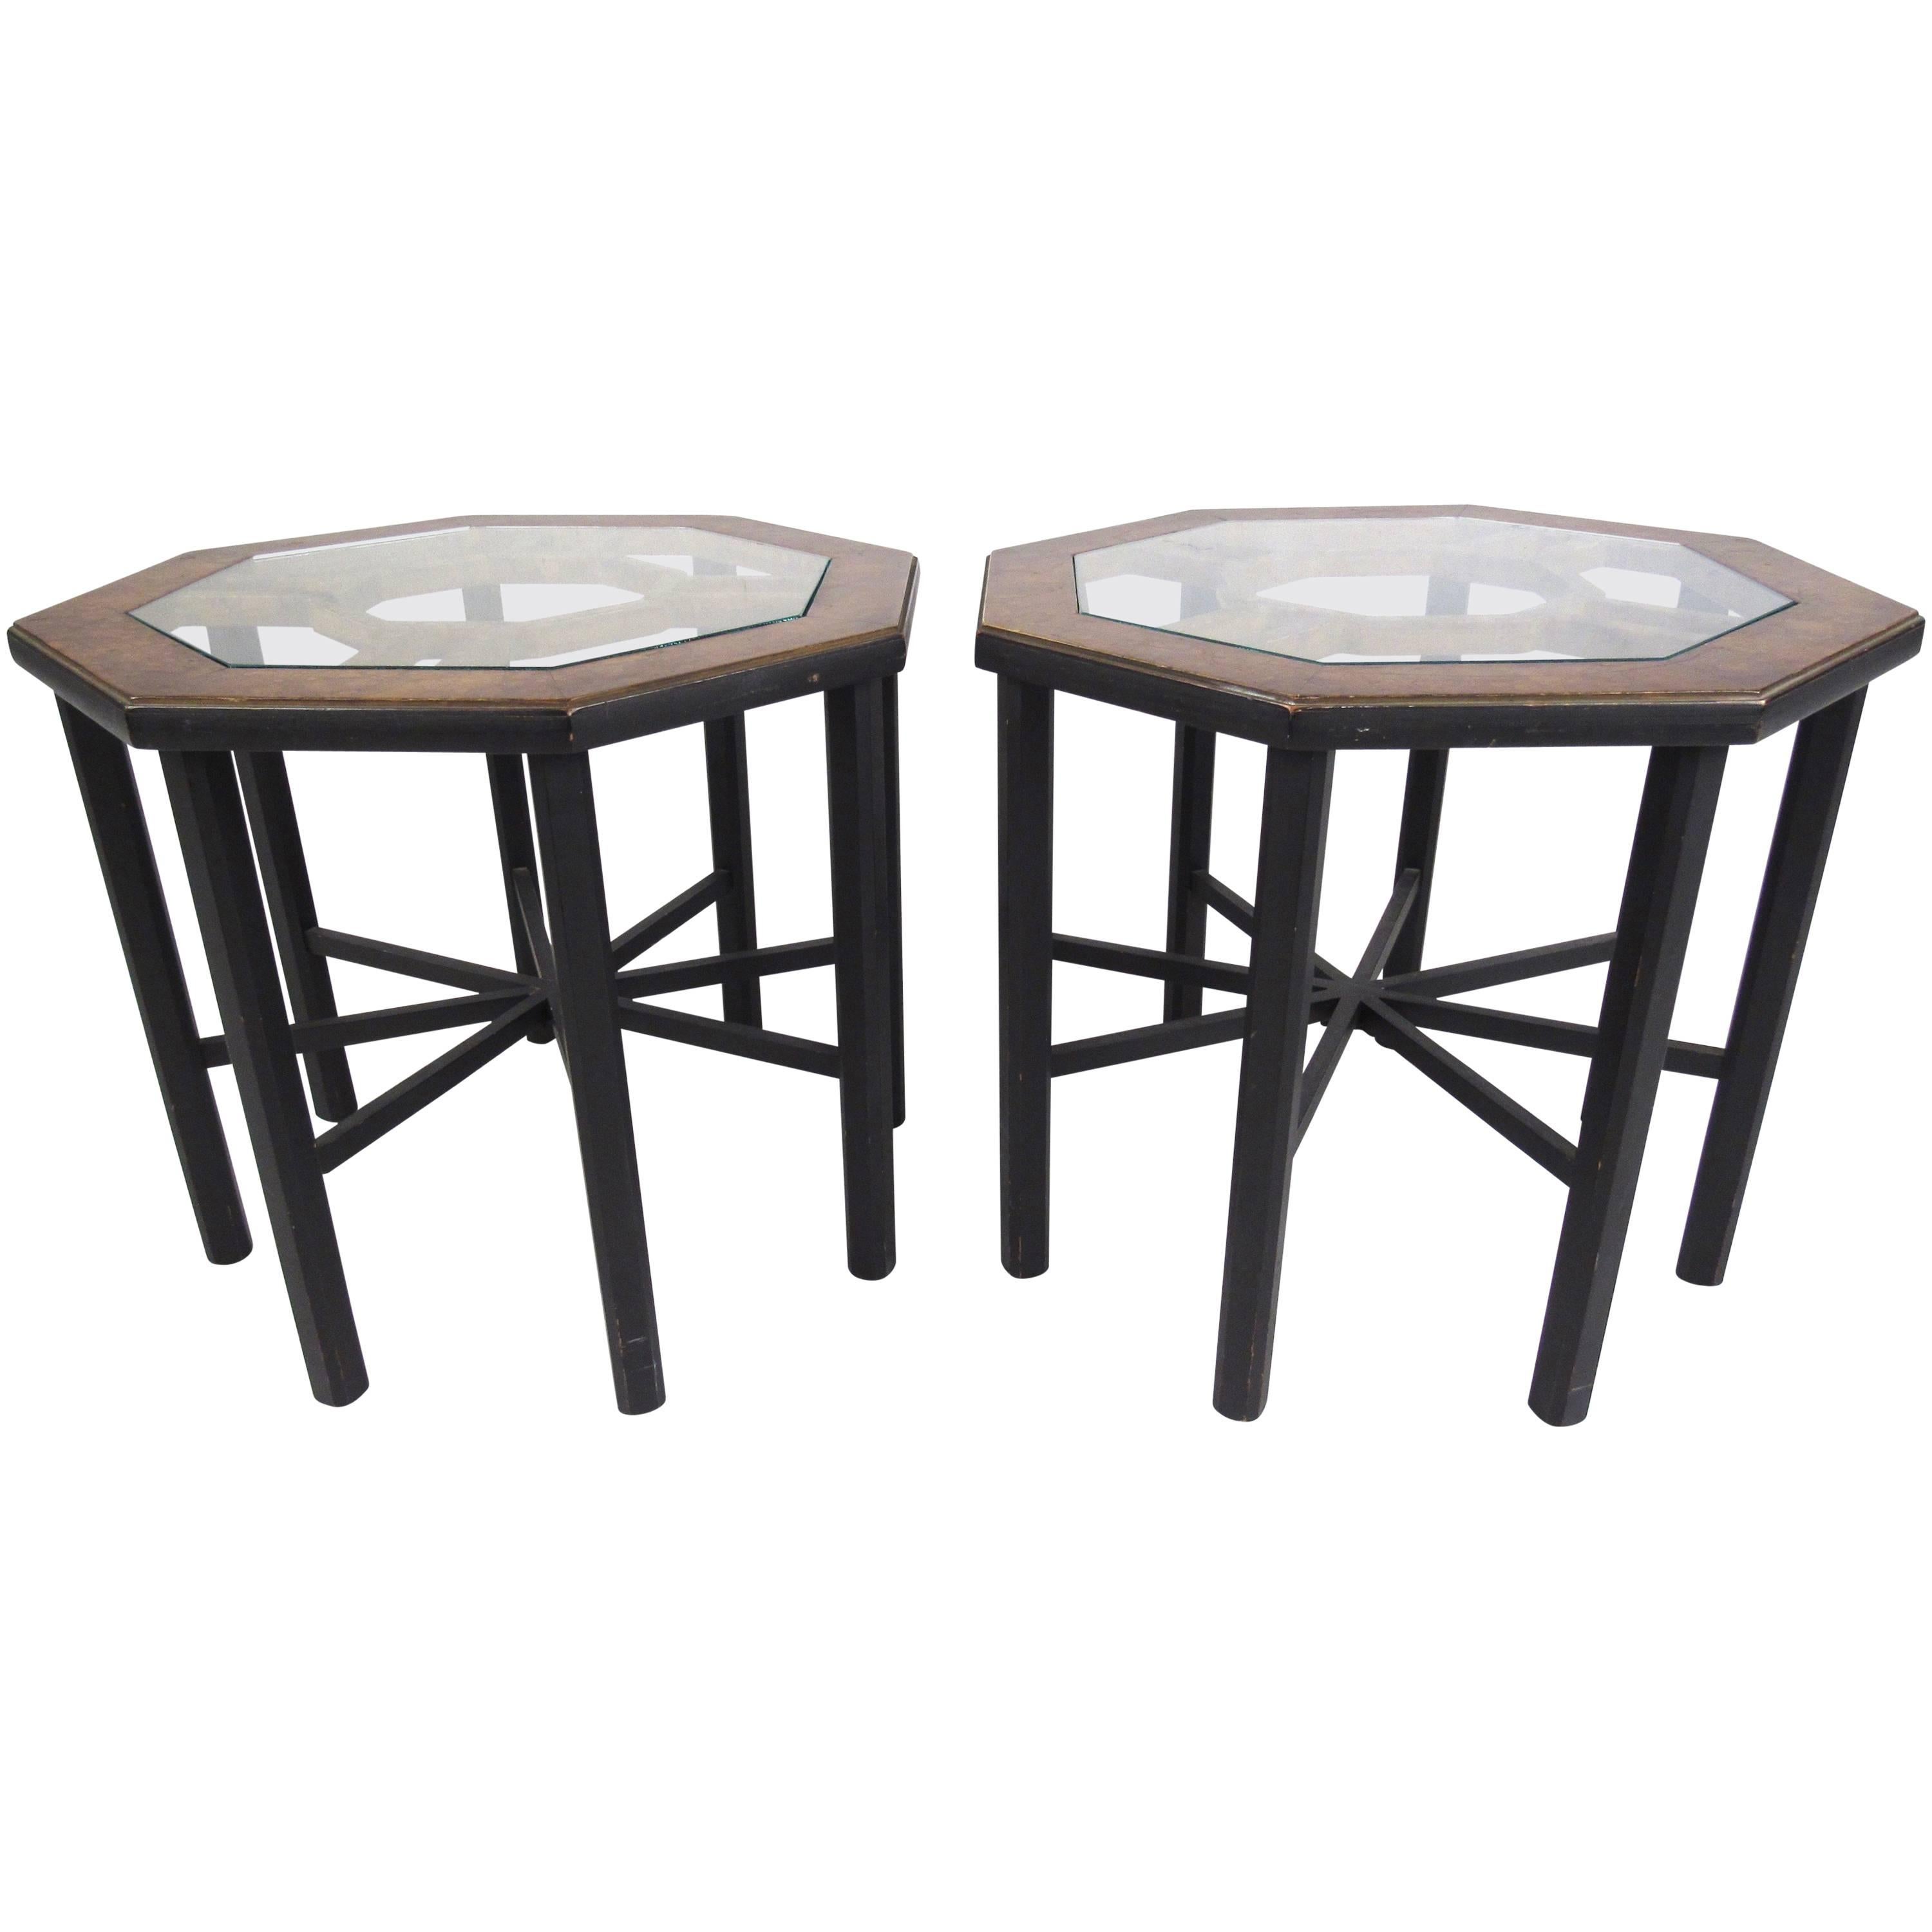 Pair of Mastercraft Style End Tables